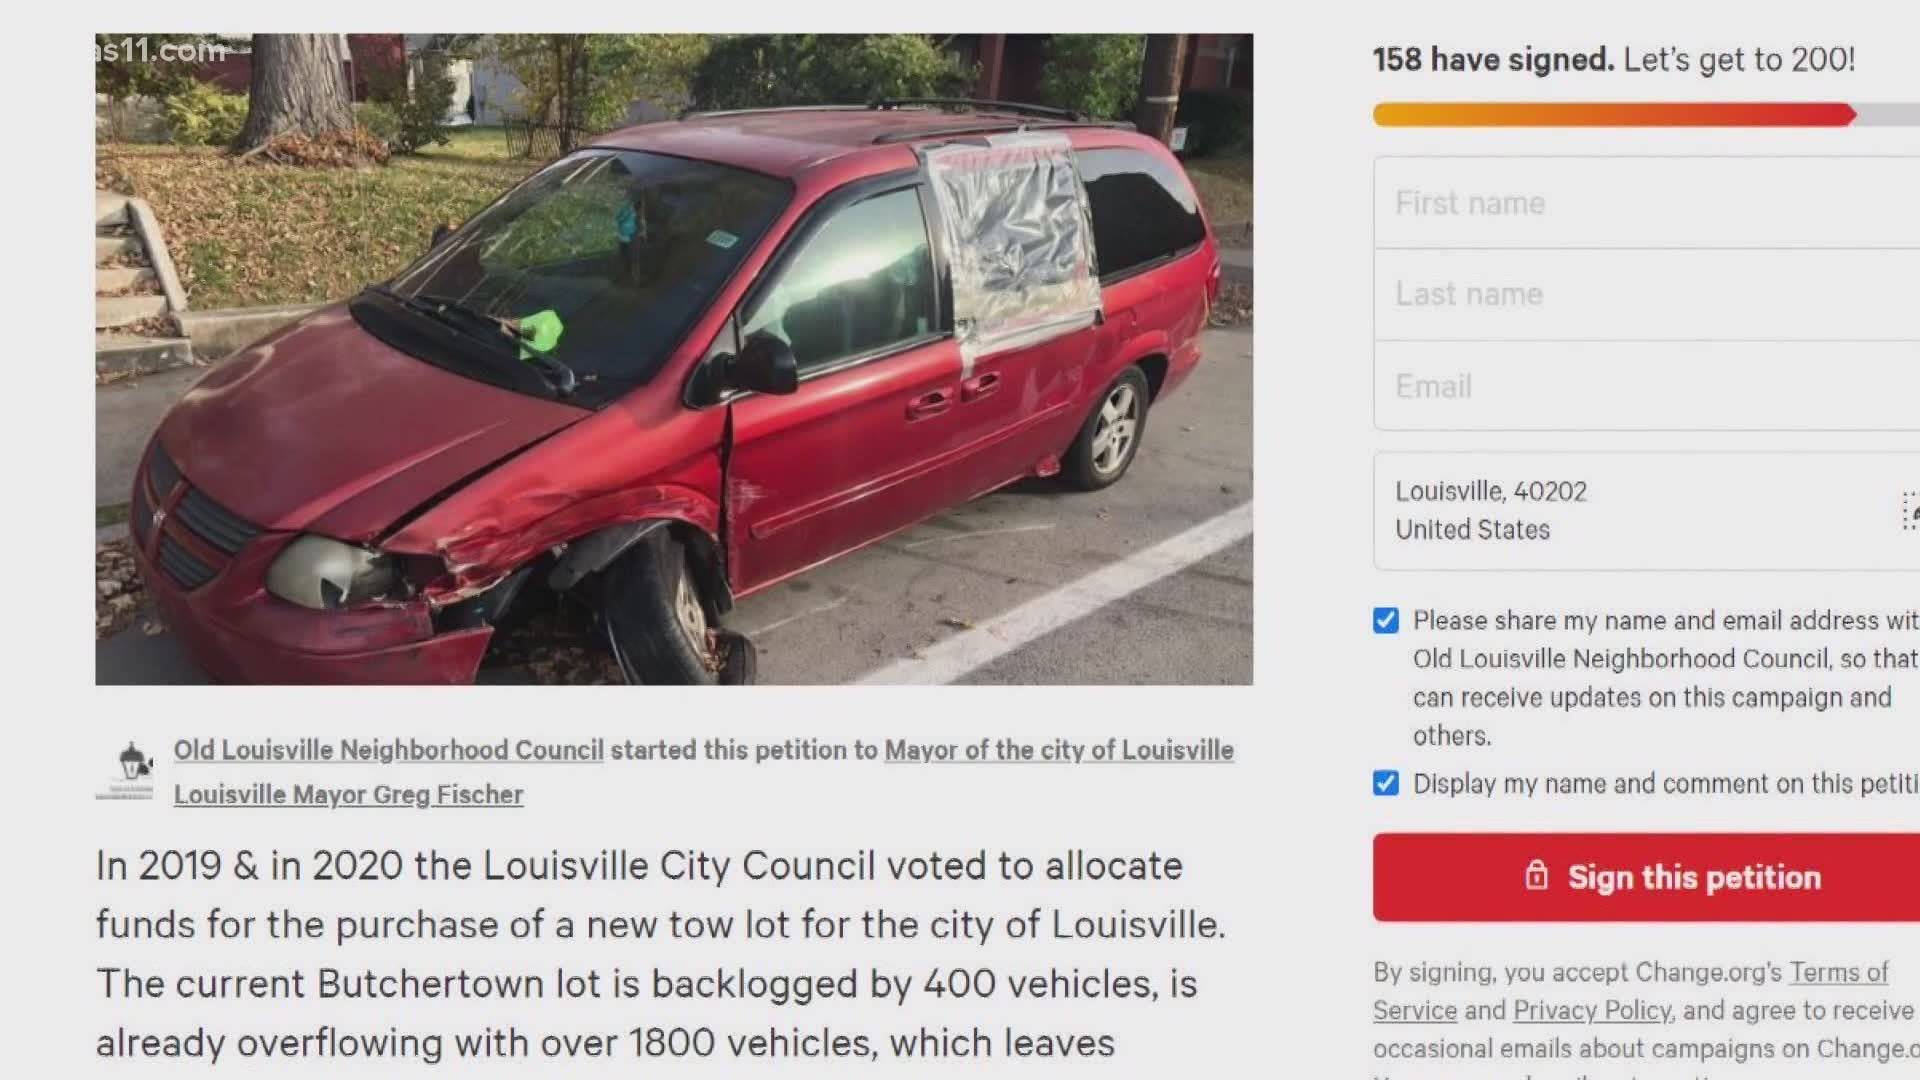 A local neighborhood association is worried about cars piling up on Louisville streets. The tow lot is overflowing and the city doesn't have a plan to fix it yet.